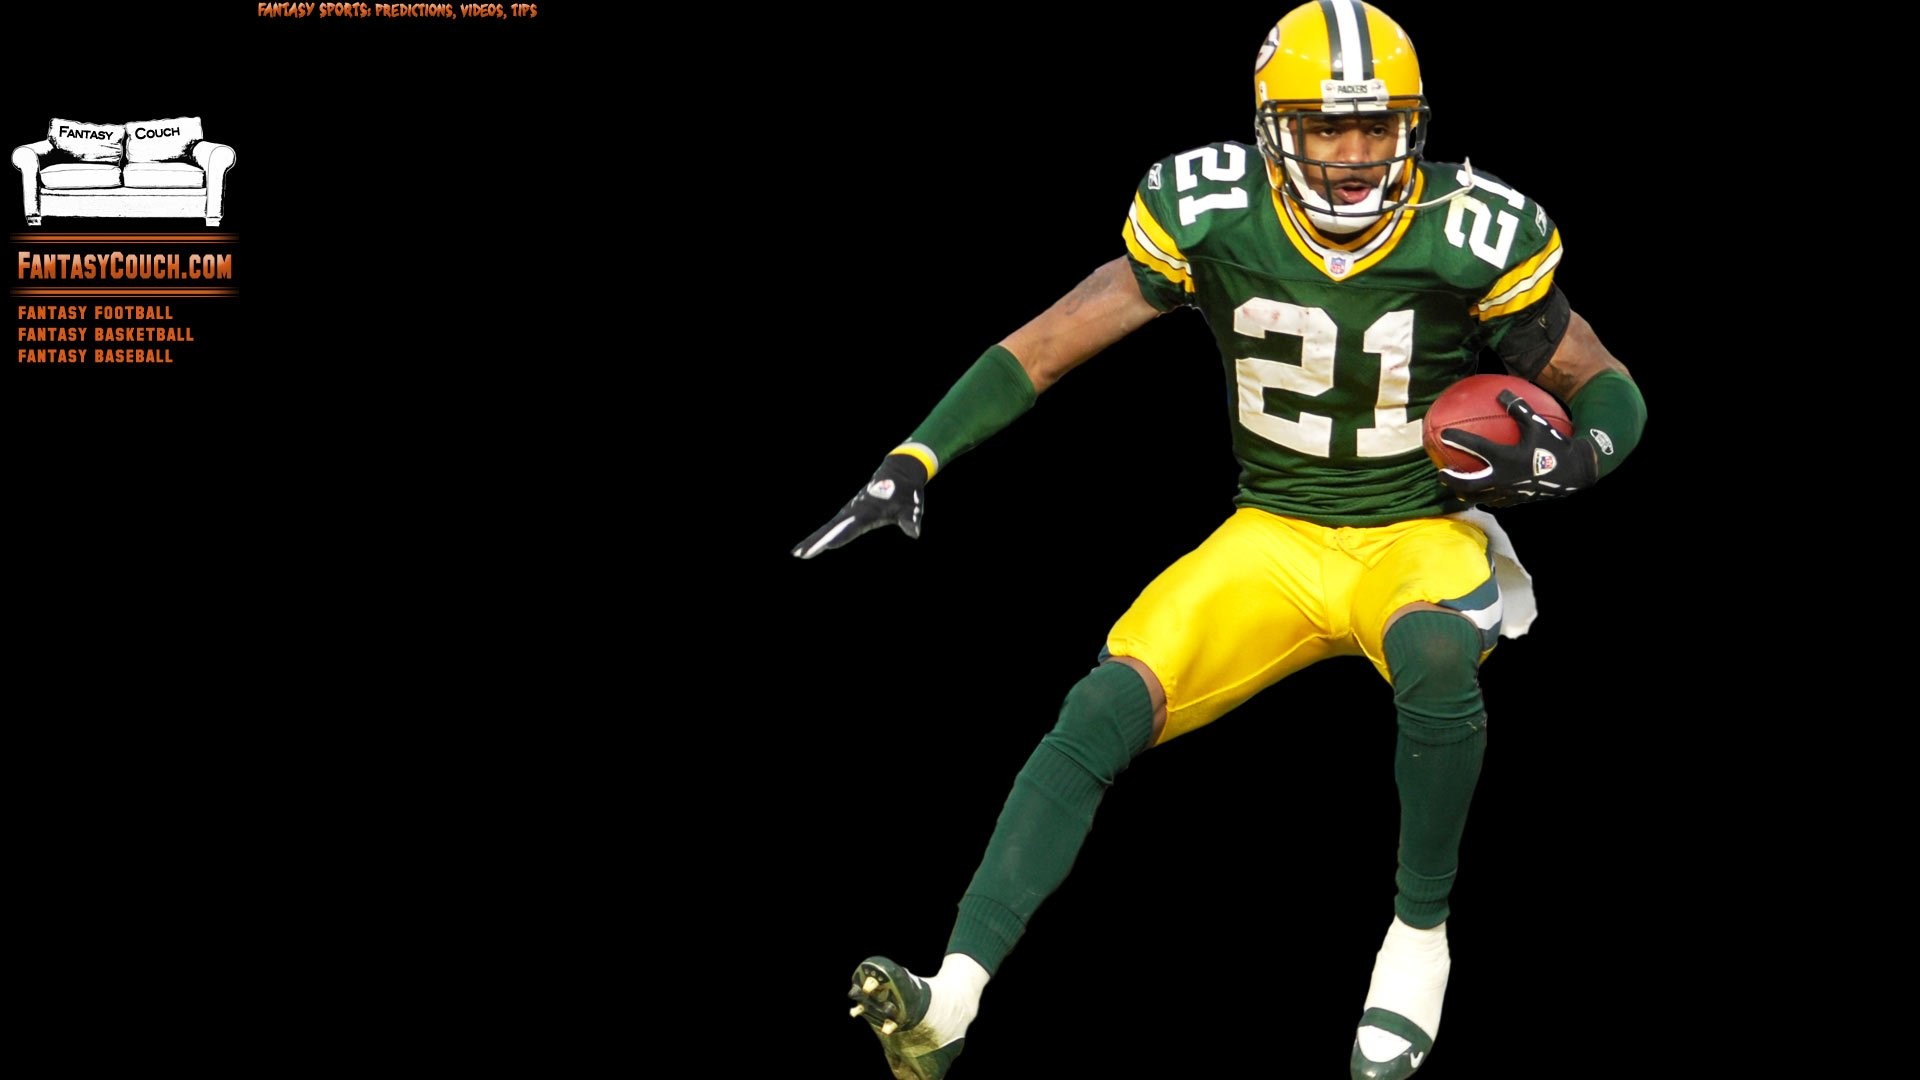 1920x1080 Best Charles Woodson Twitter Wallpaper Download free wallpapers and desktop  backgrounds in a variety of screen